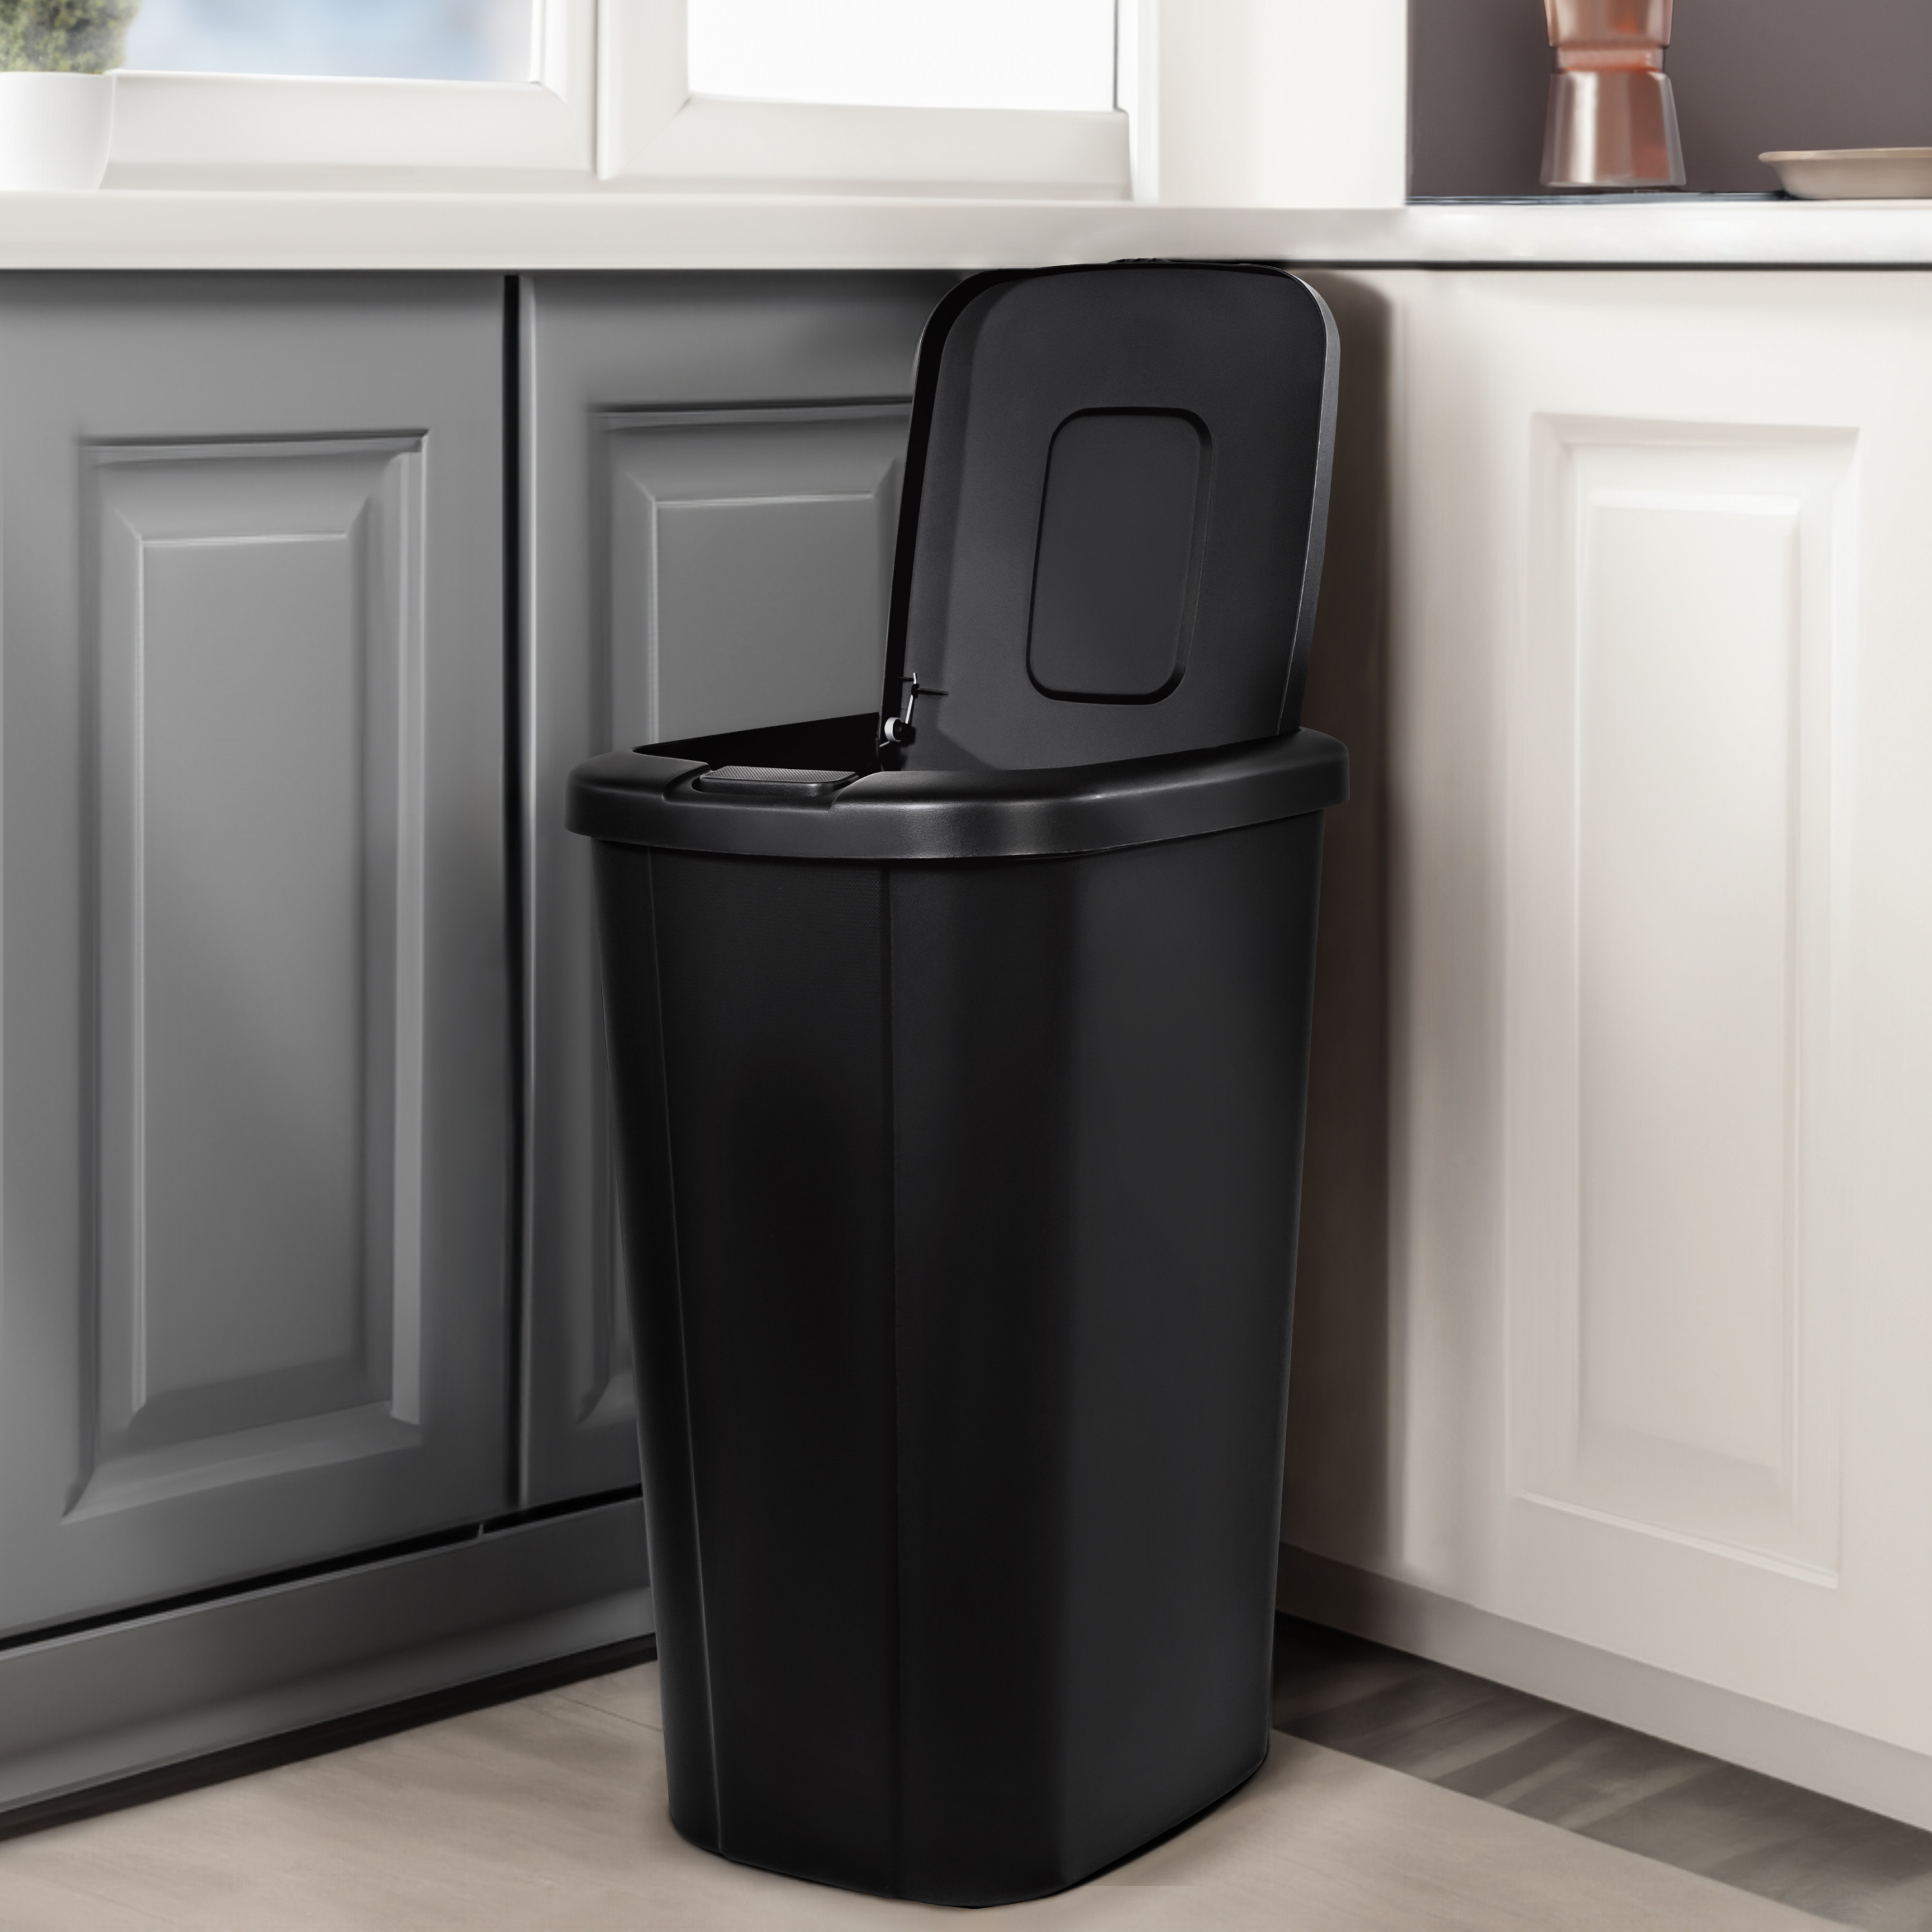 Hefty 13.3 Gallon Trash Can, Plastic Touch Top Kitchen Trash Can, Black - image 4 of 8